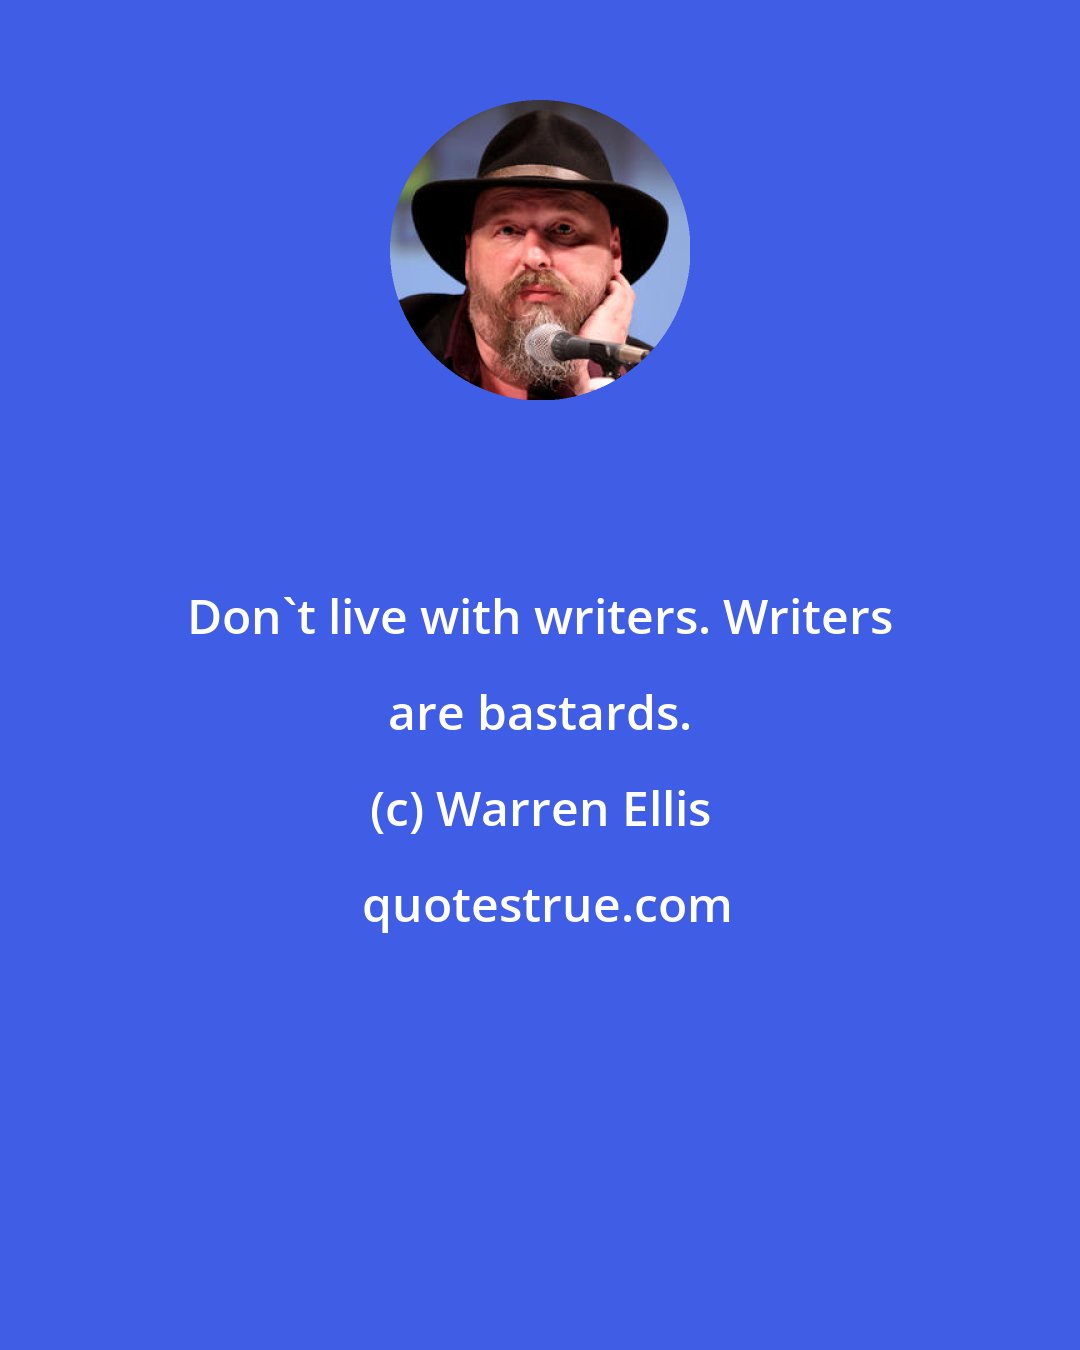 Warren Ellis: Don't live with writers. Writers are bastards.